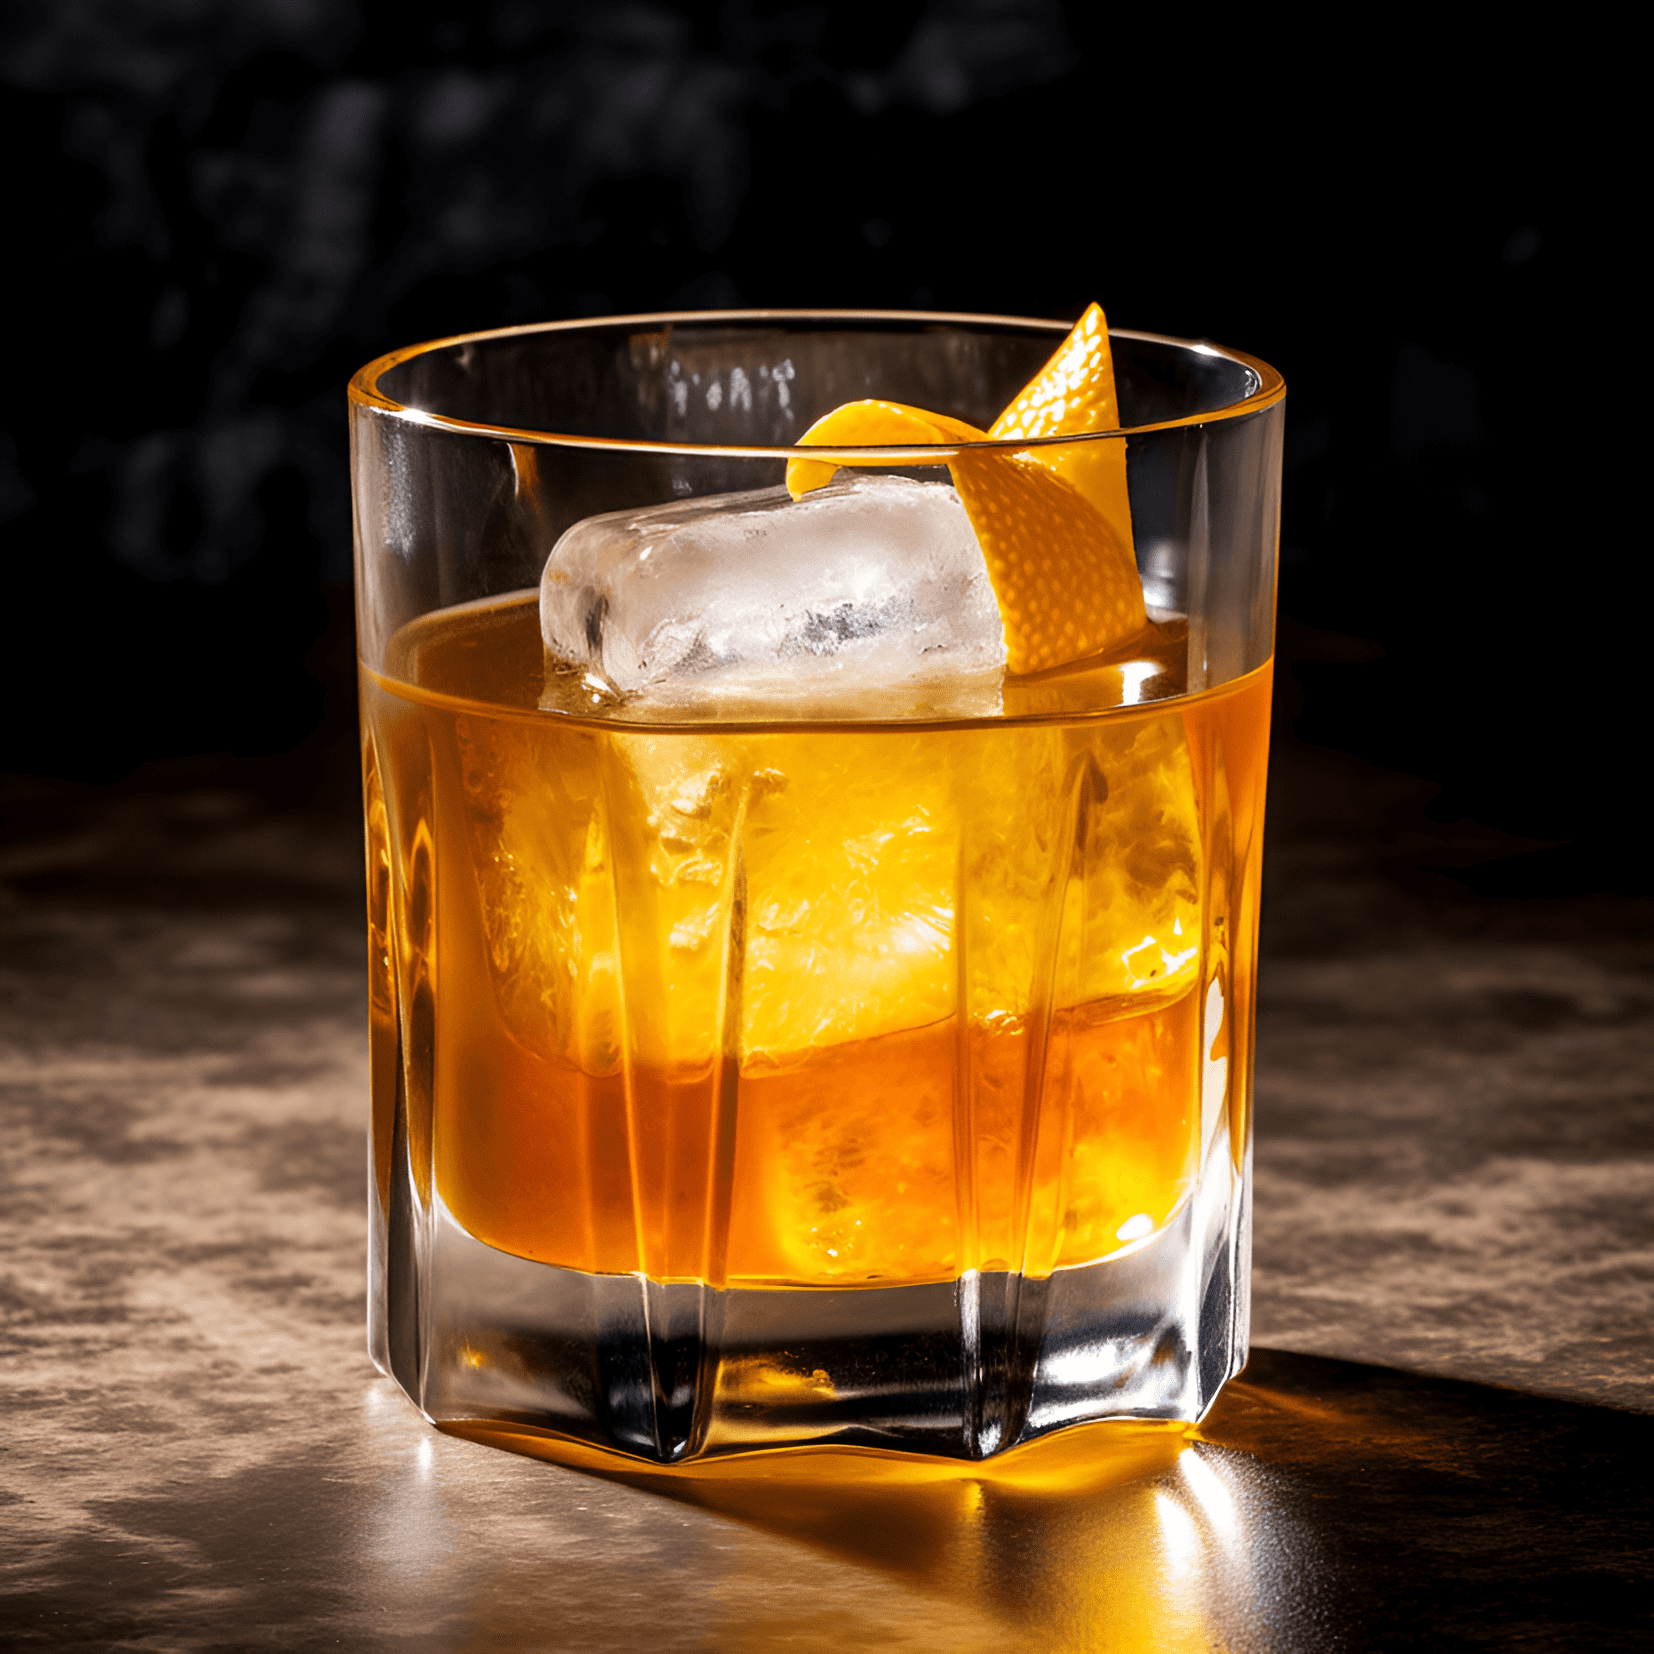 The Nixon cocktail has a balanced taste, with a combination of sweet, sour, and slightly bitter flavors. The bourbon provides a rich, smooth base, while the lemon juice adds a refreshing tartness. The orgeat syrup lends a subtle sweetness and nutty undertones.